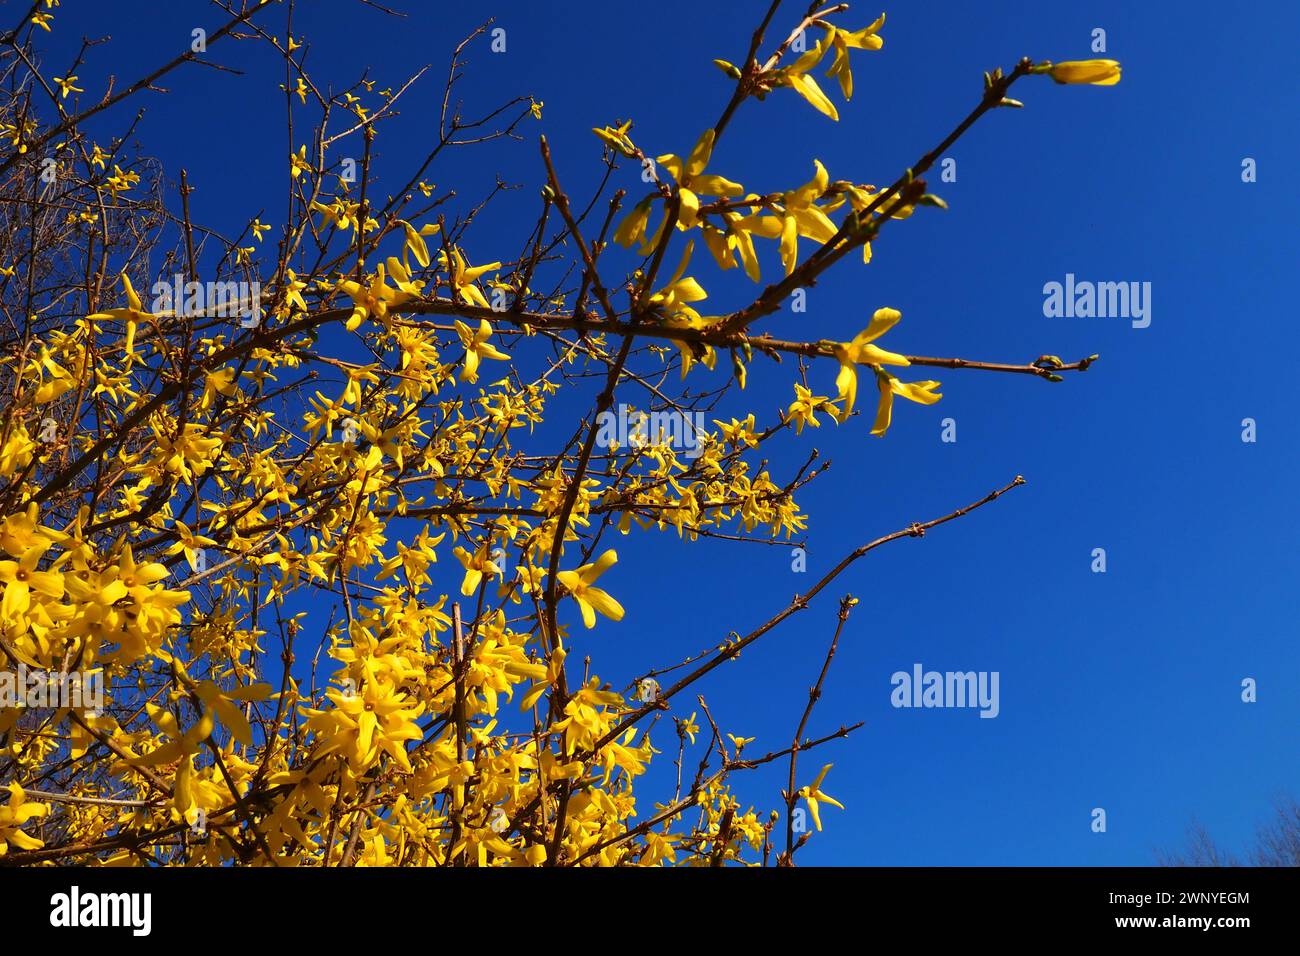 Forsythia is a genus of shrubs and small trees of the Olive family. Numerous yellow flowers on branches and shoots against a blue sky. Lamiaceae Olive Stock Photo